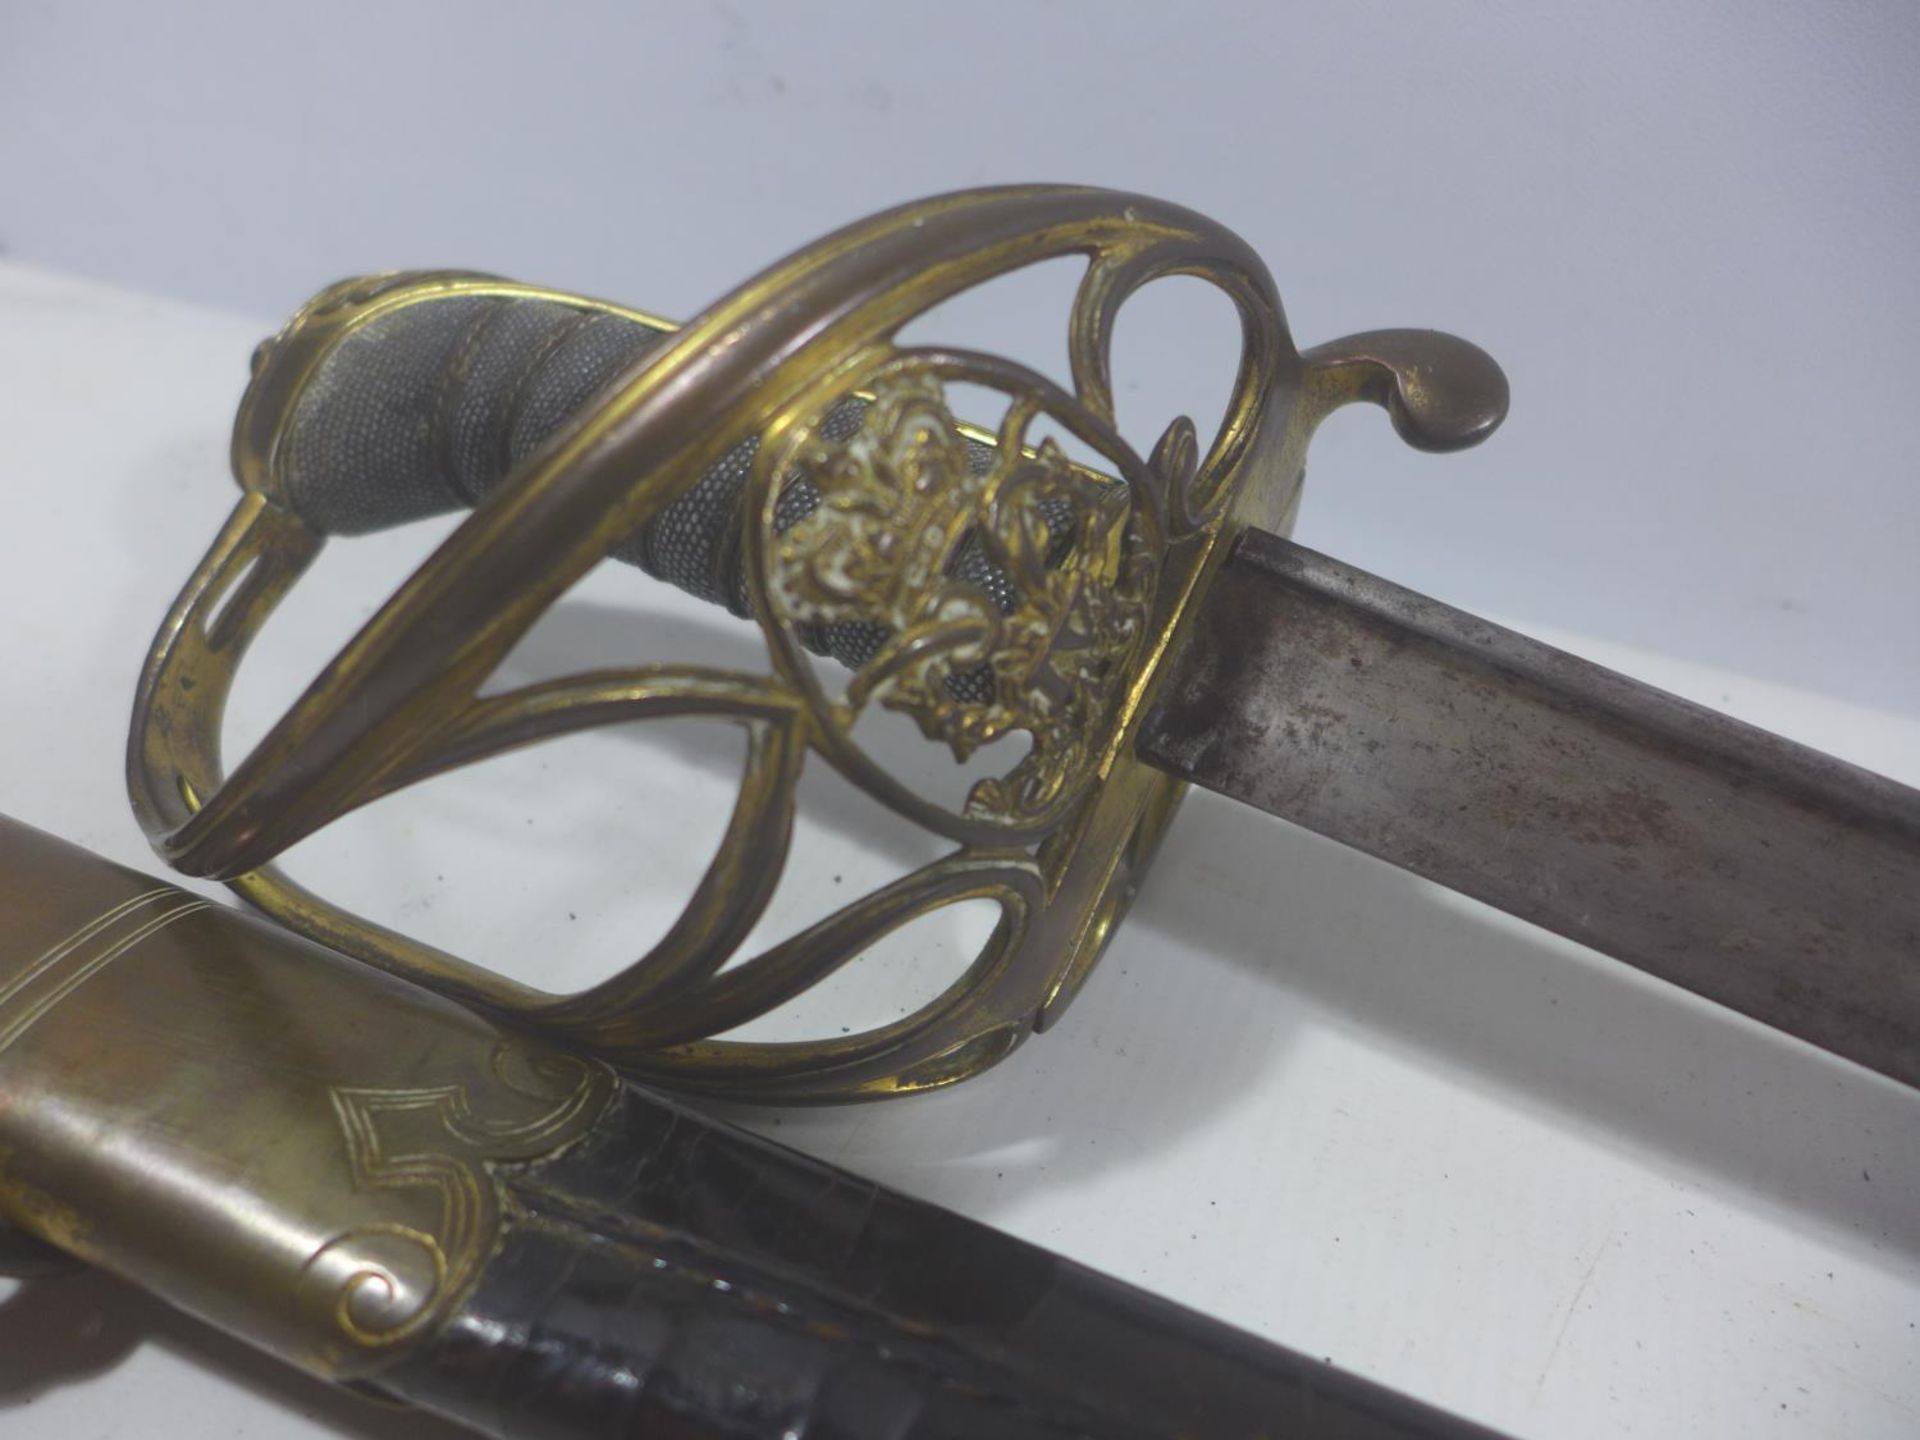 A WILLIAM IV 1822 PATTERN OFFICERS SWORD AND SCABBARD, 82CM BLADE WITH ACID ETCHED DECORATION, - Image 7 of 9